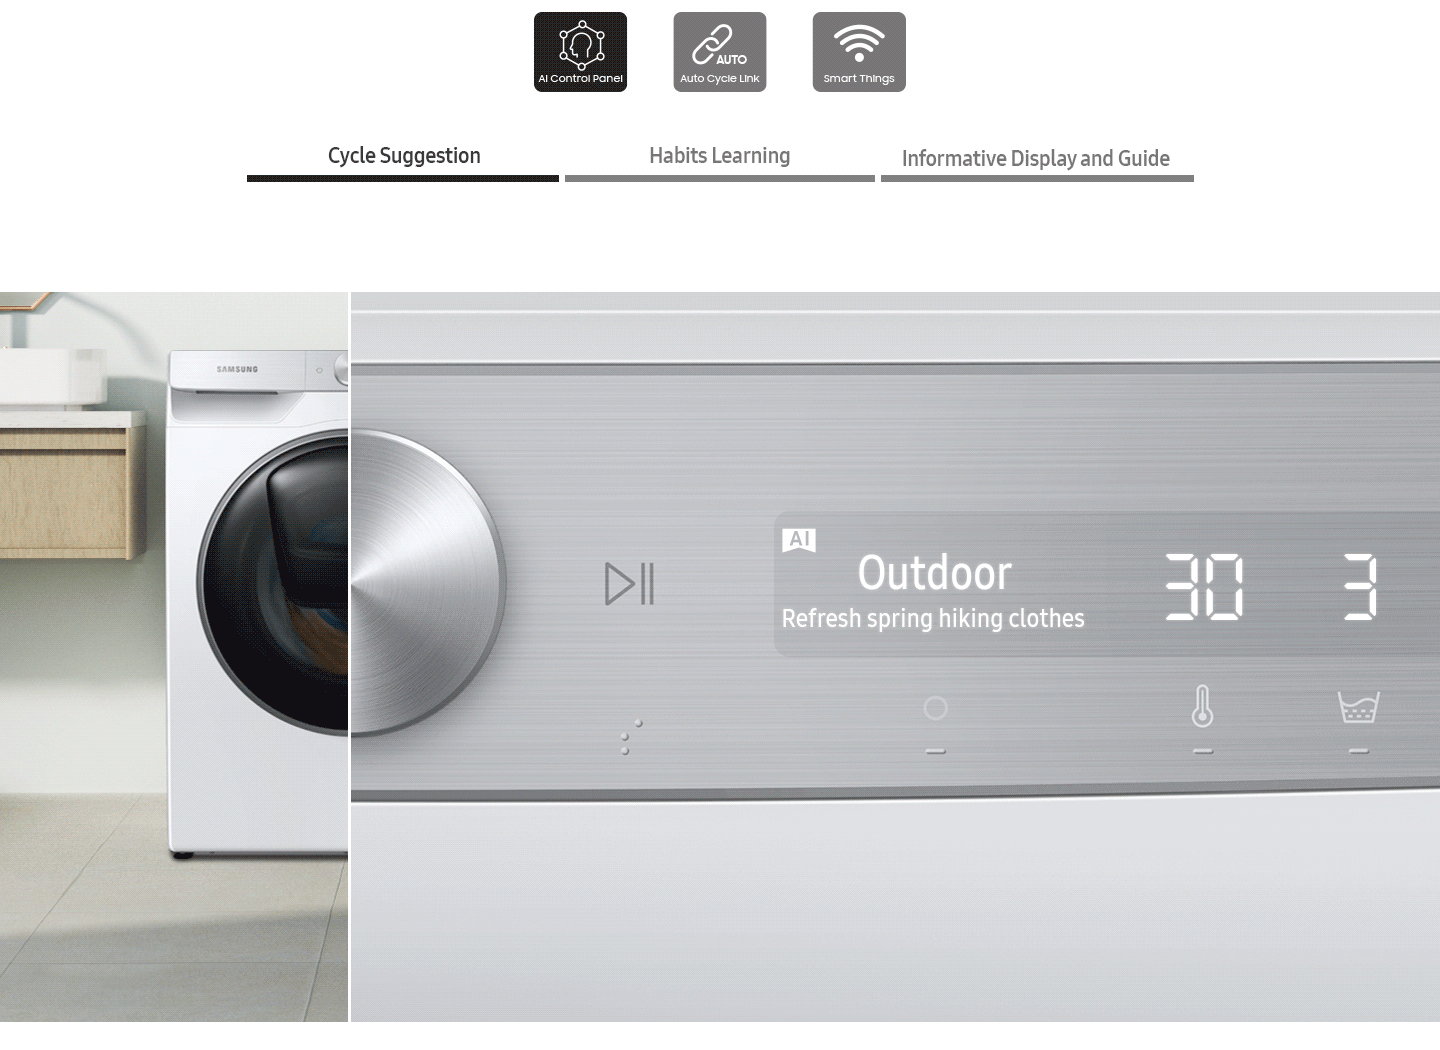 The AI washer’s control panel displays the Cycle suggestion, Habits learning, Informative display and guide.